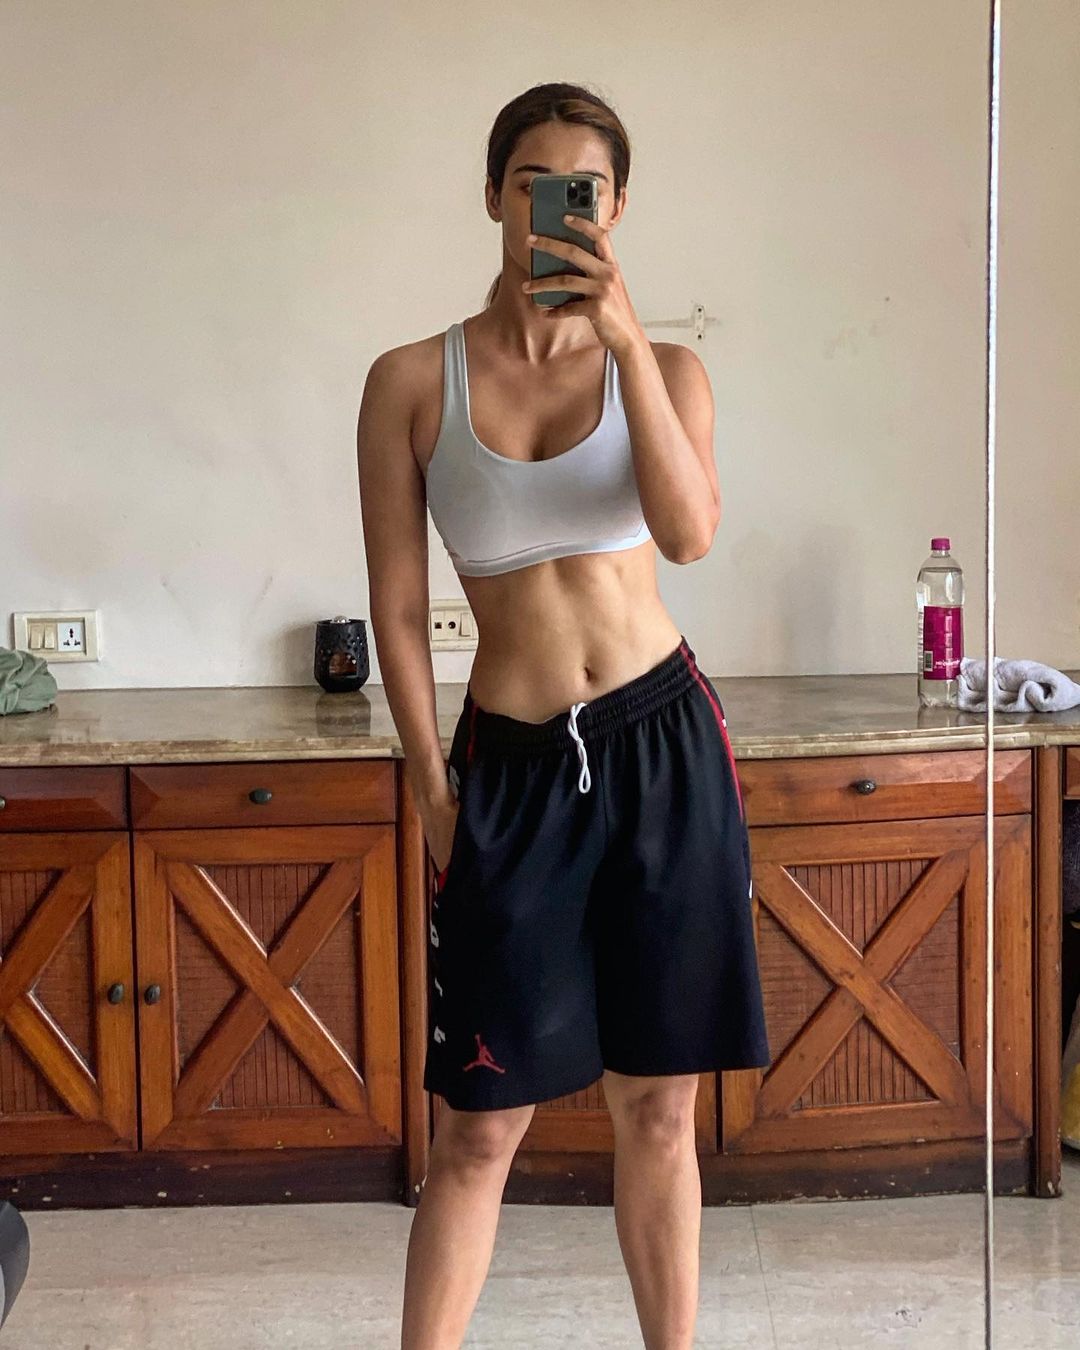 Disha Patani looks flawless in the sports bra and loose shorts while taking another mirror selfie